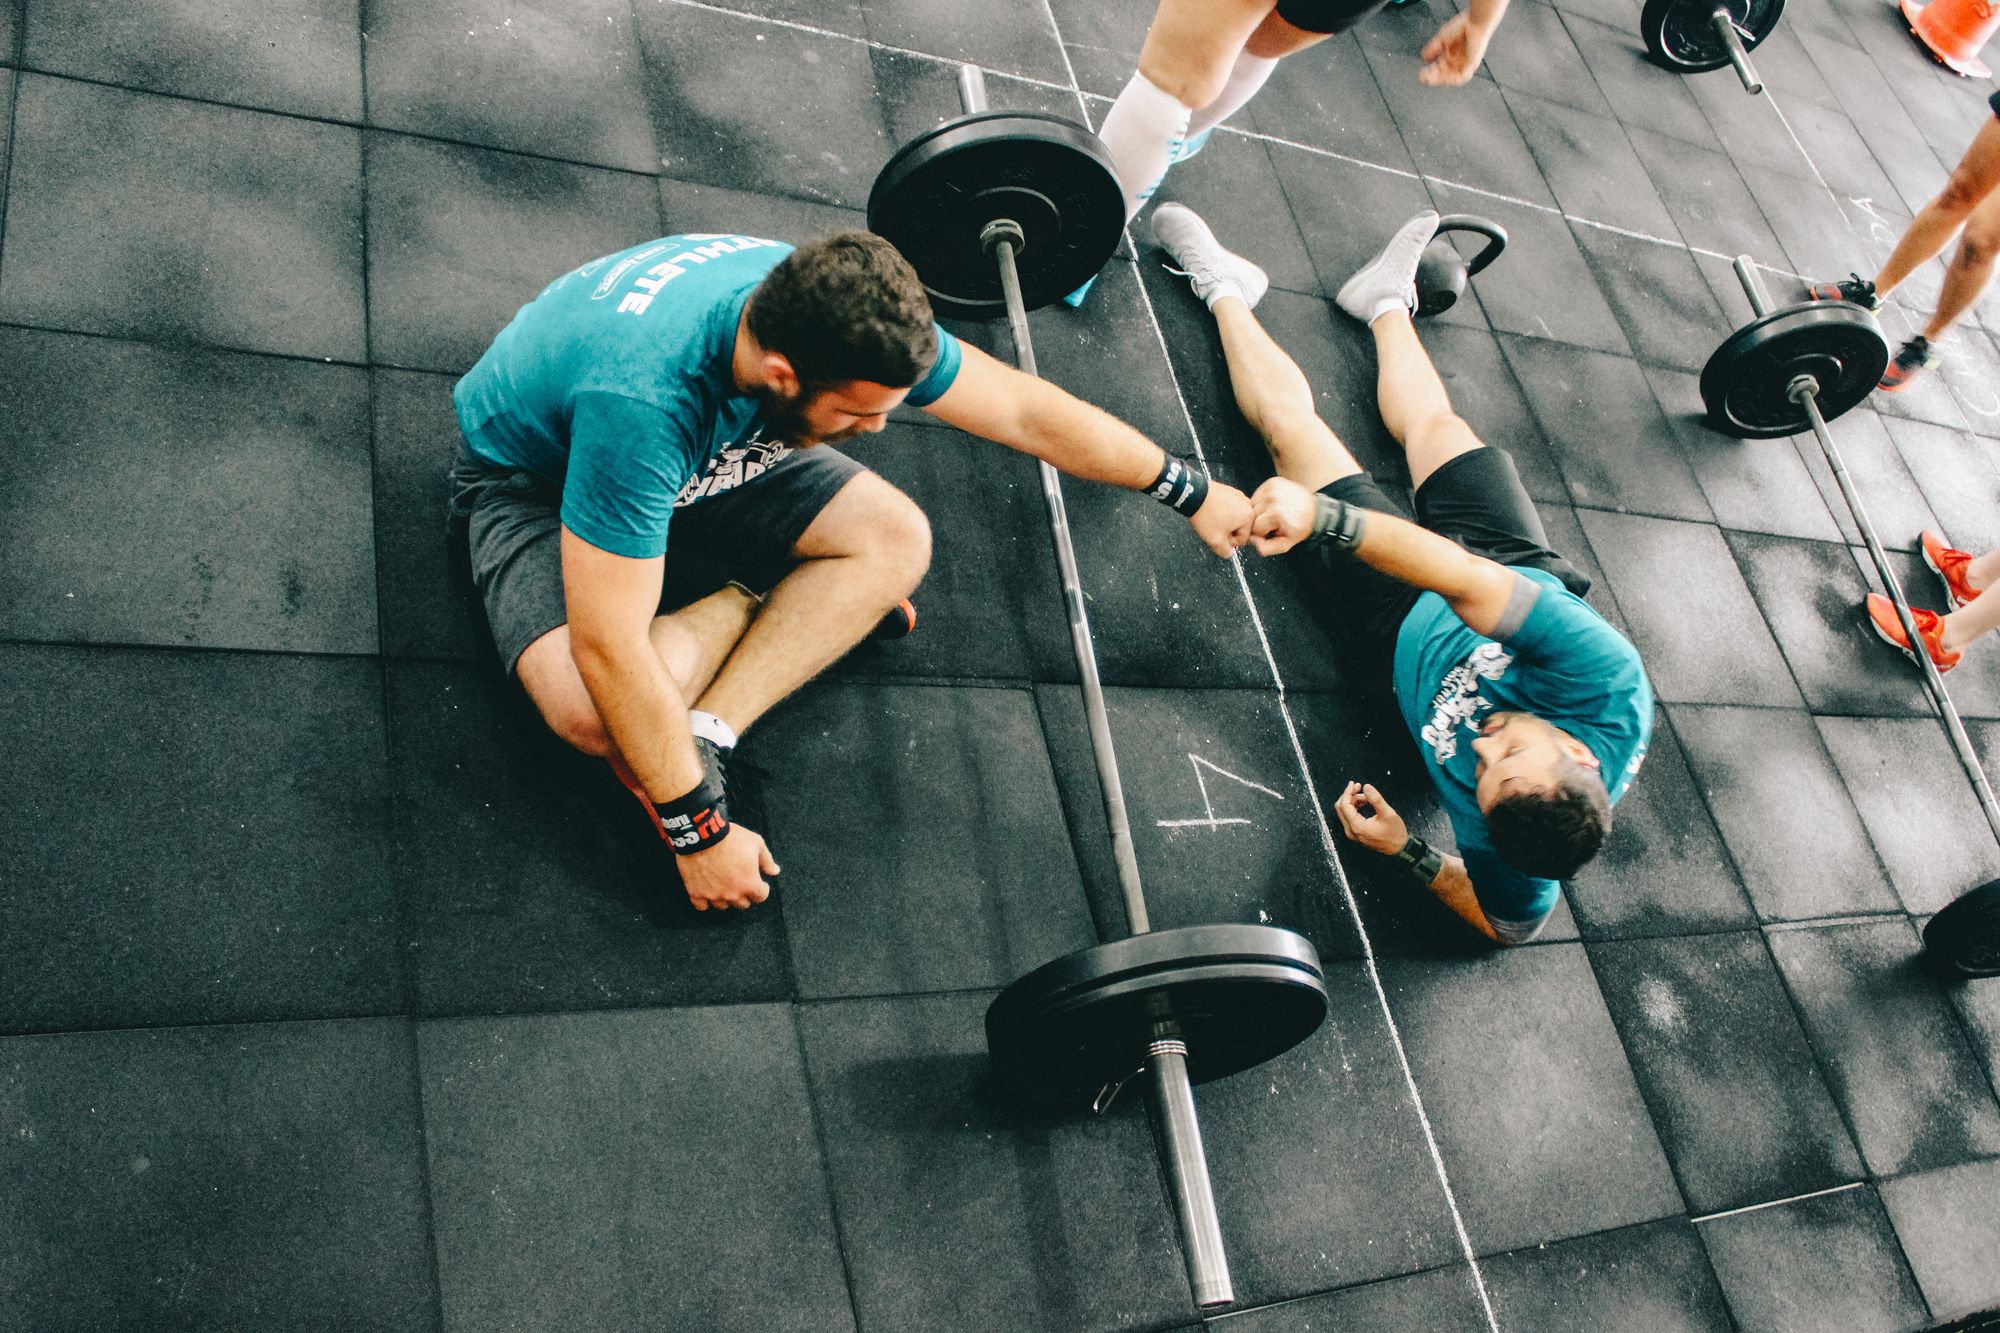 The Corporate Athlete: improving clients' mental and physical well-being through bespoke personal training